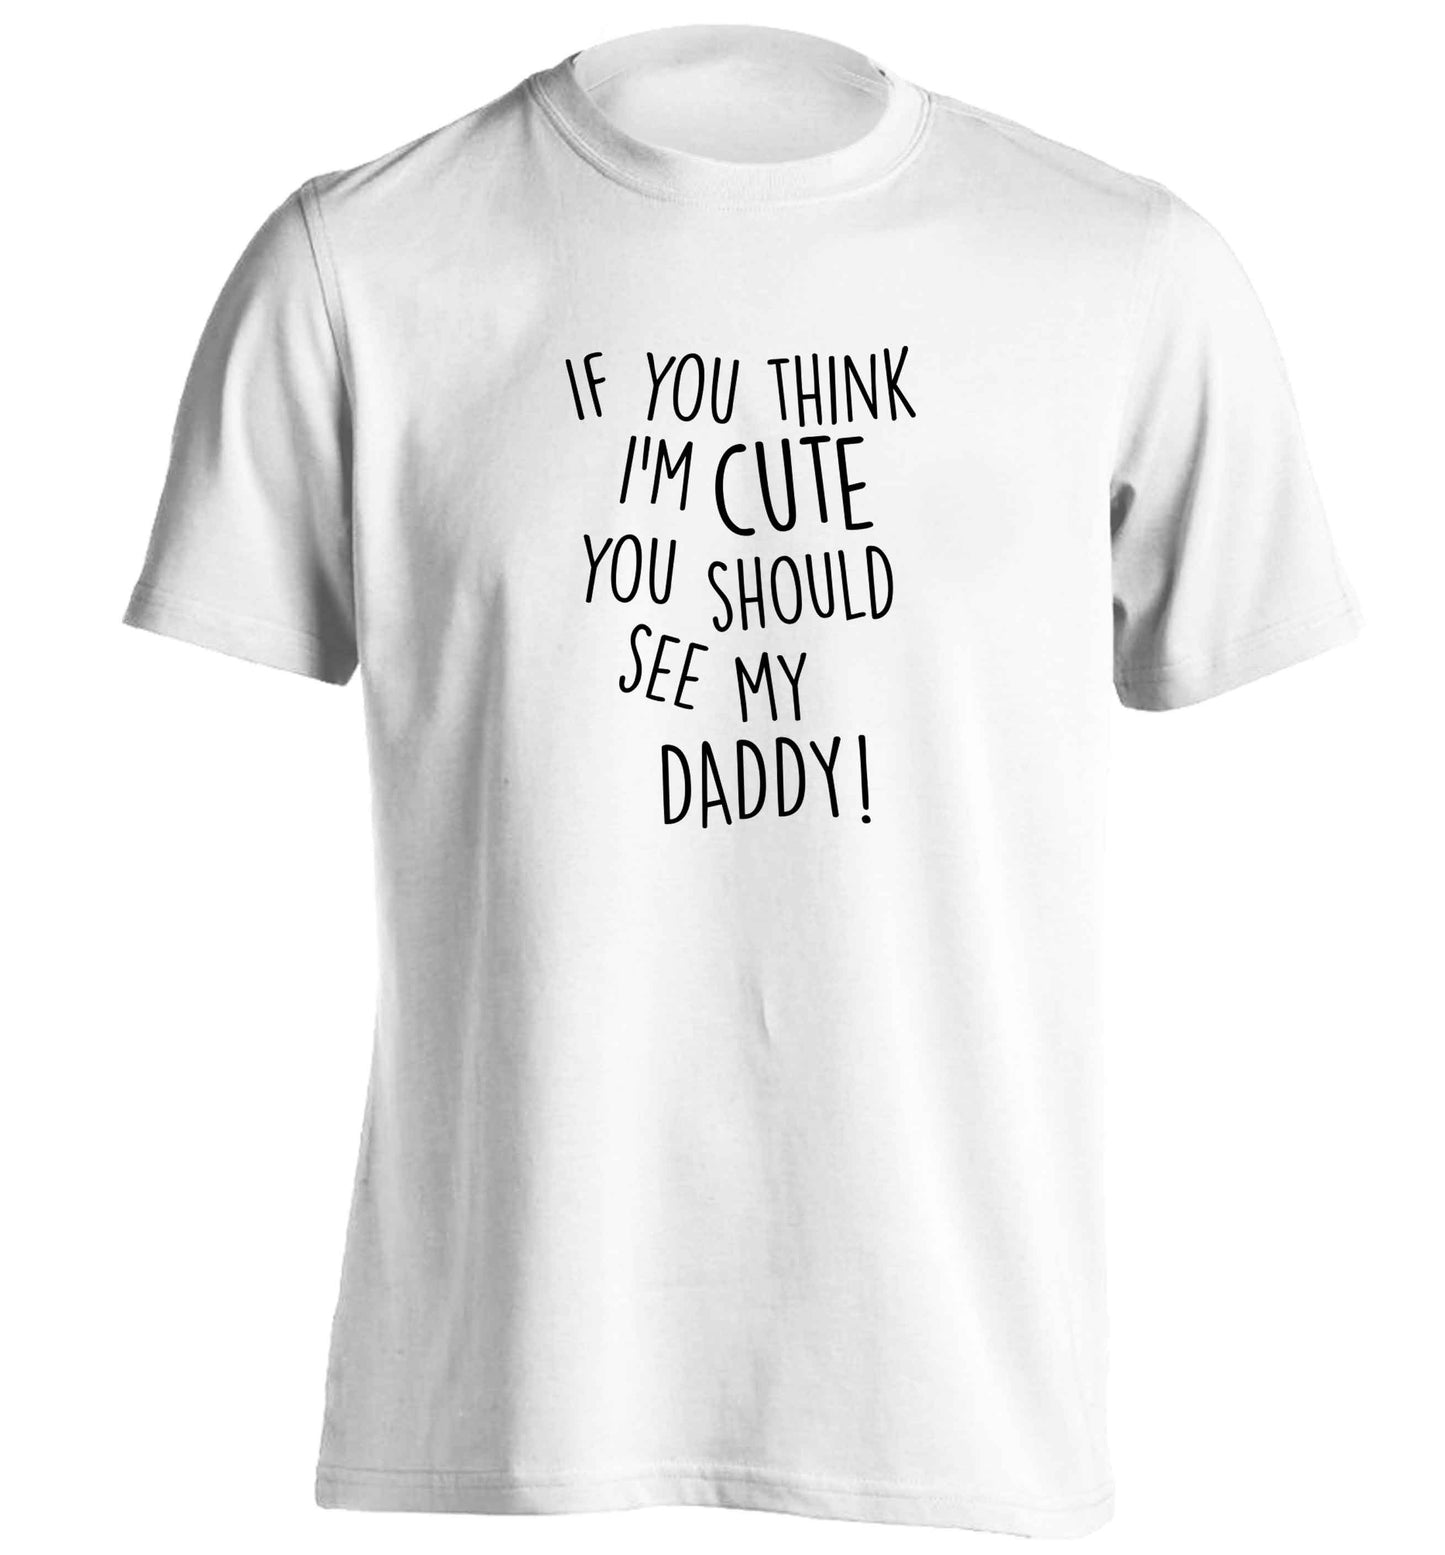 If you think I'm cute you should see my daddy adults unisex white Tshirt 2XL